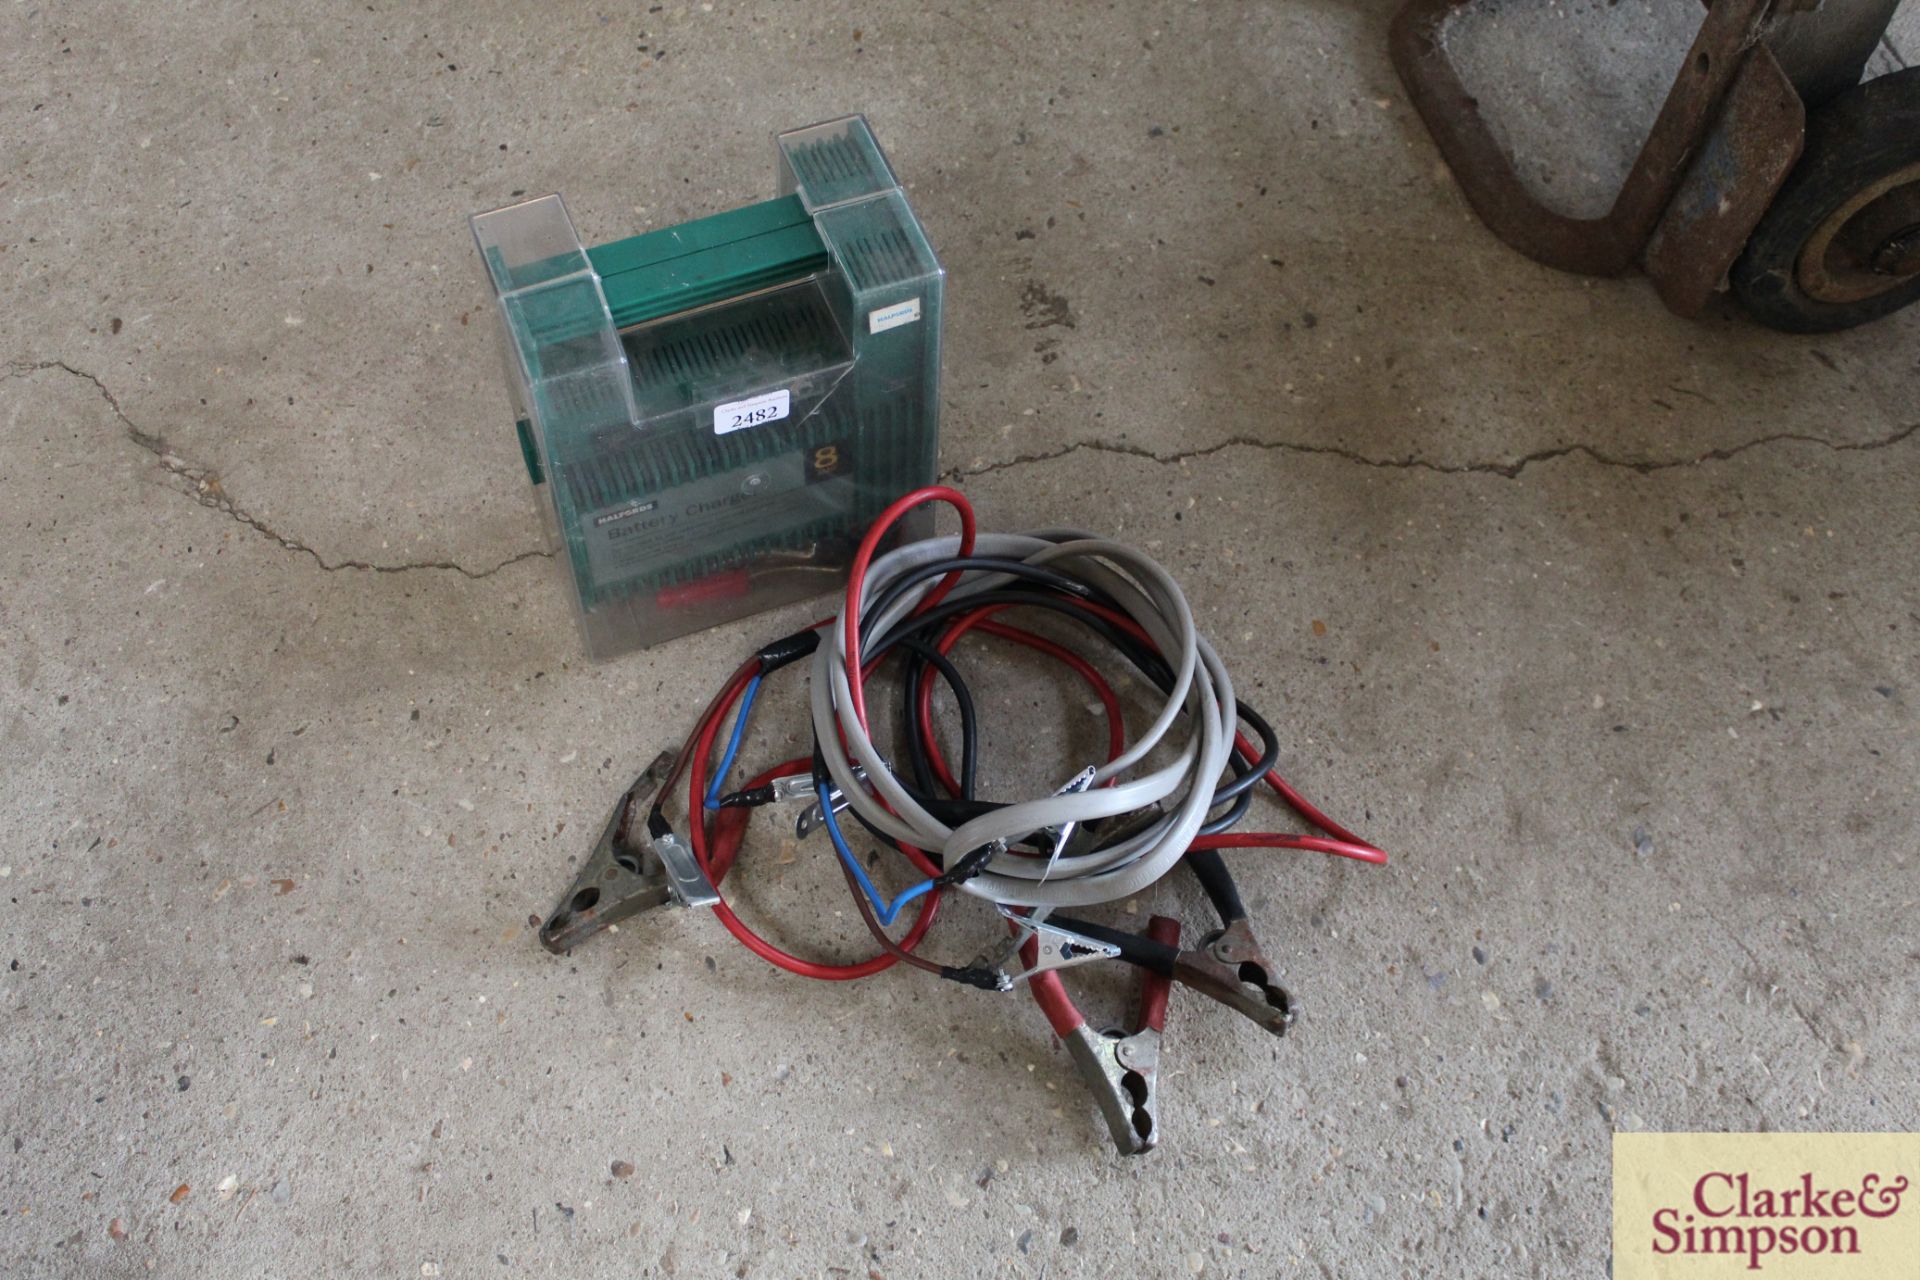 Jump leads and Halfords battery charger.